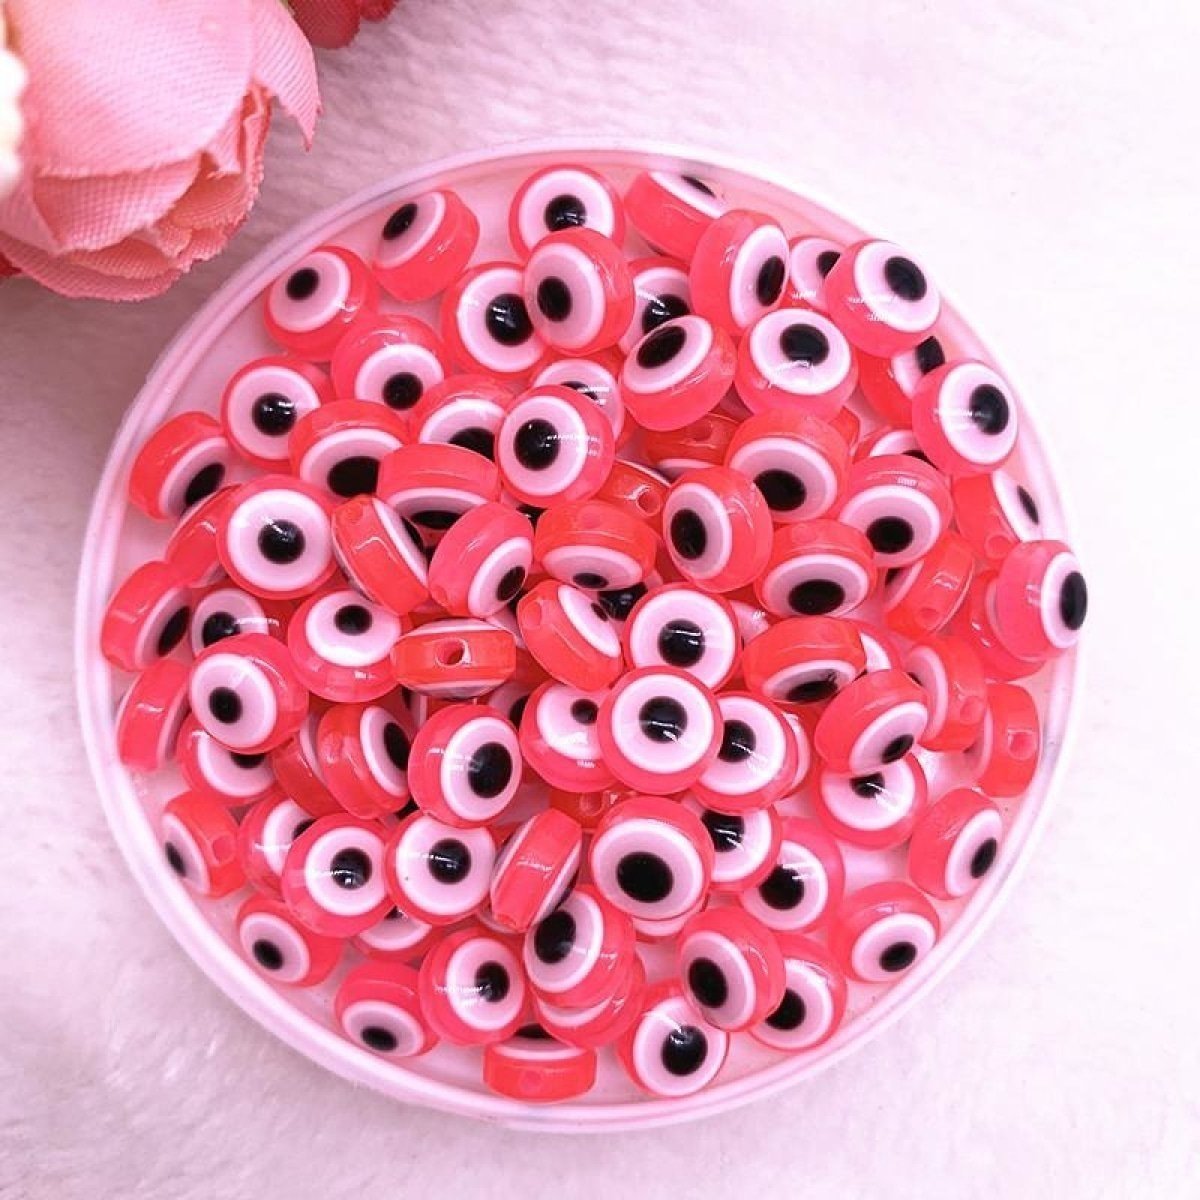 48pcs 8/10mm Resin Spacer Beads Double Sided Eyes for Jewelry Making DIY Bracelet Beads Flat Backing - Deep Pink 8mm - - Asia Sell